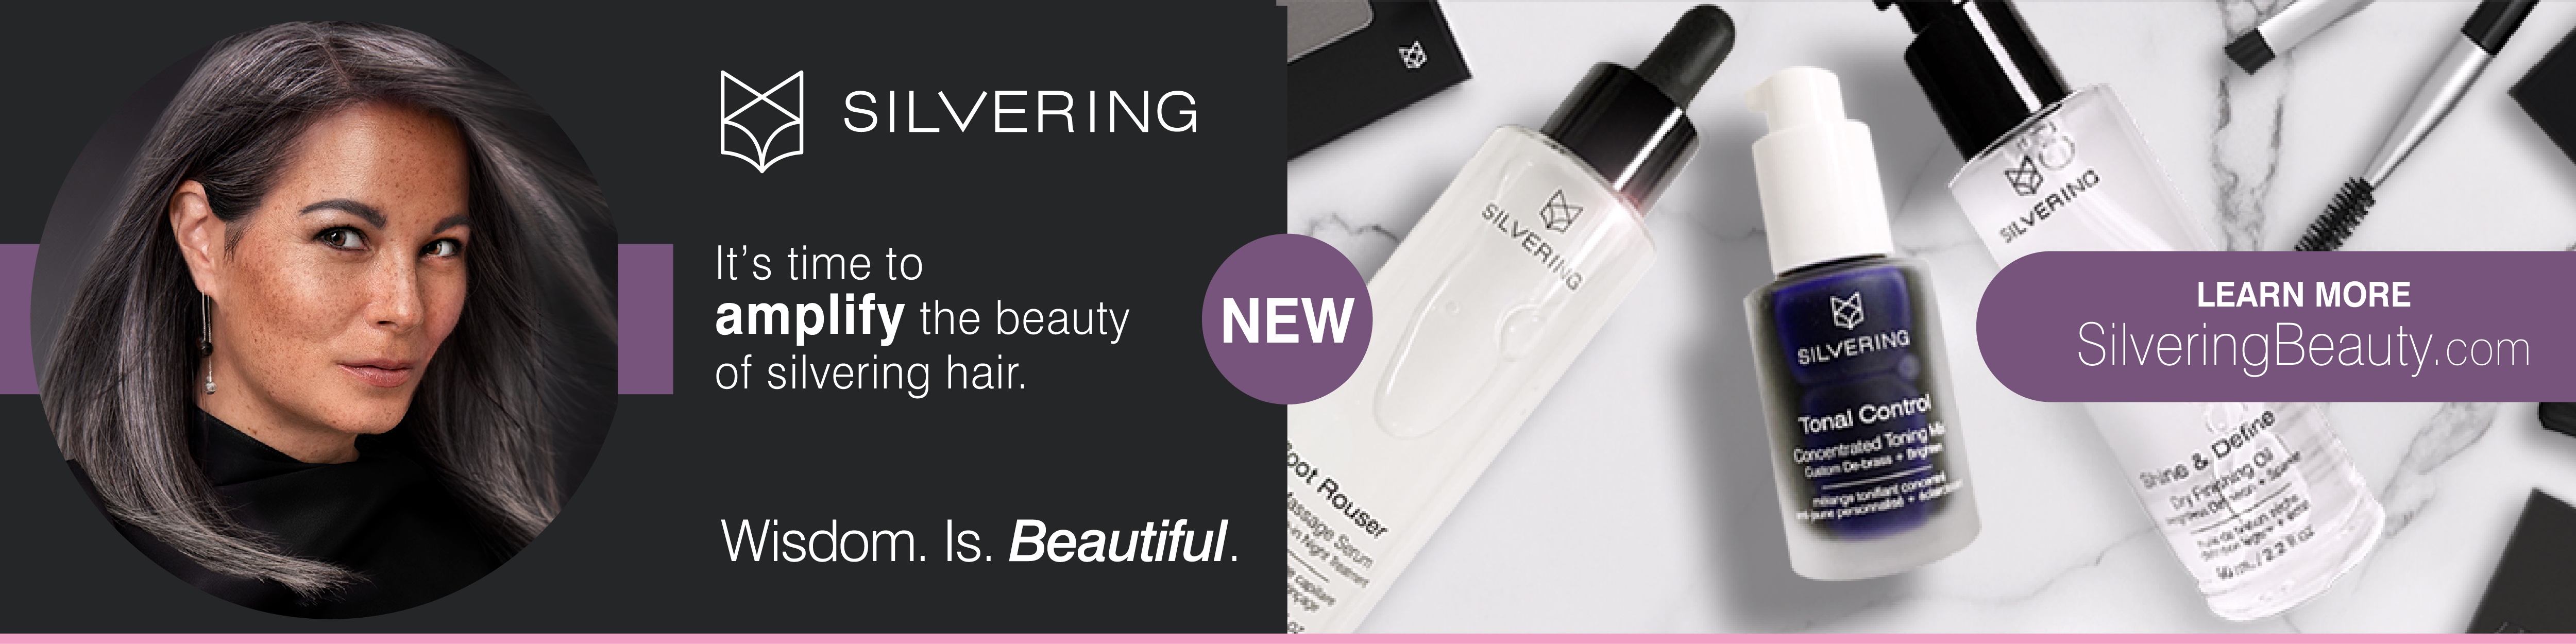 Ad for Silvering Beauty